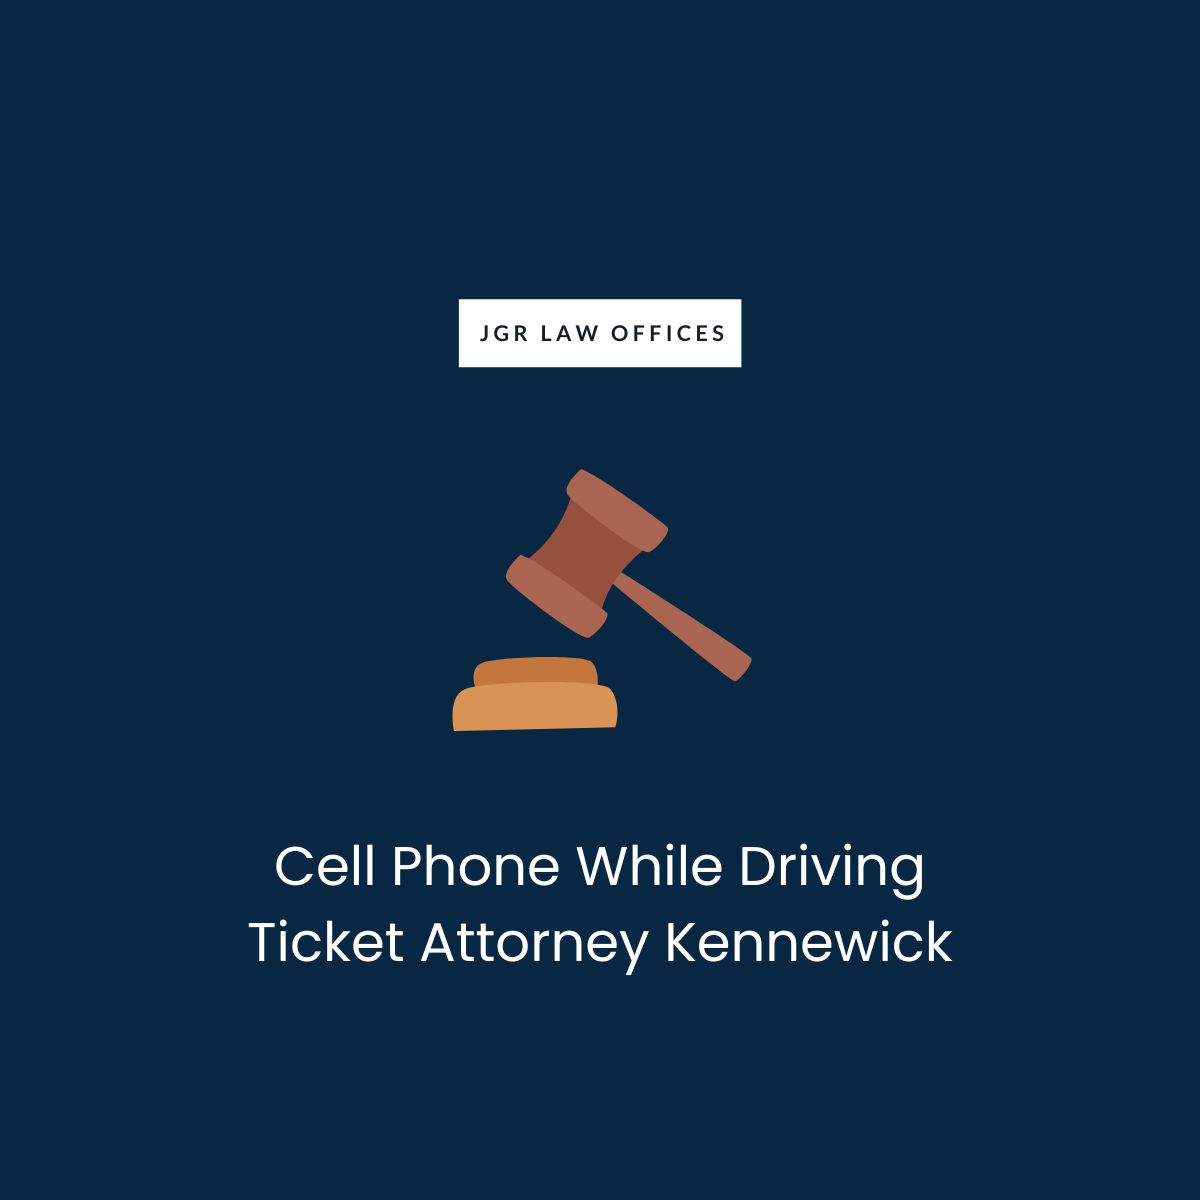 Cell Phone While Driving Ticket Attorney Kennewick